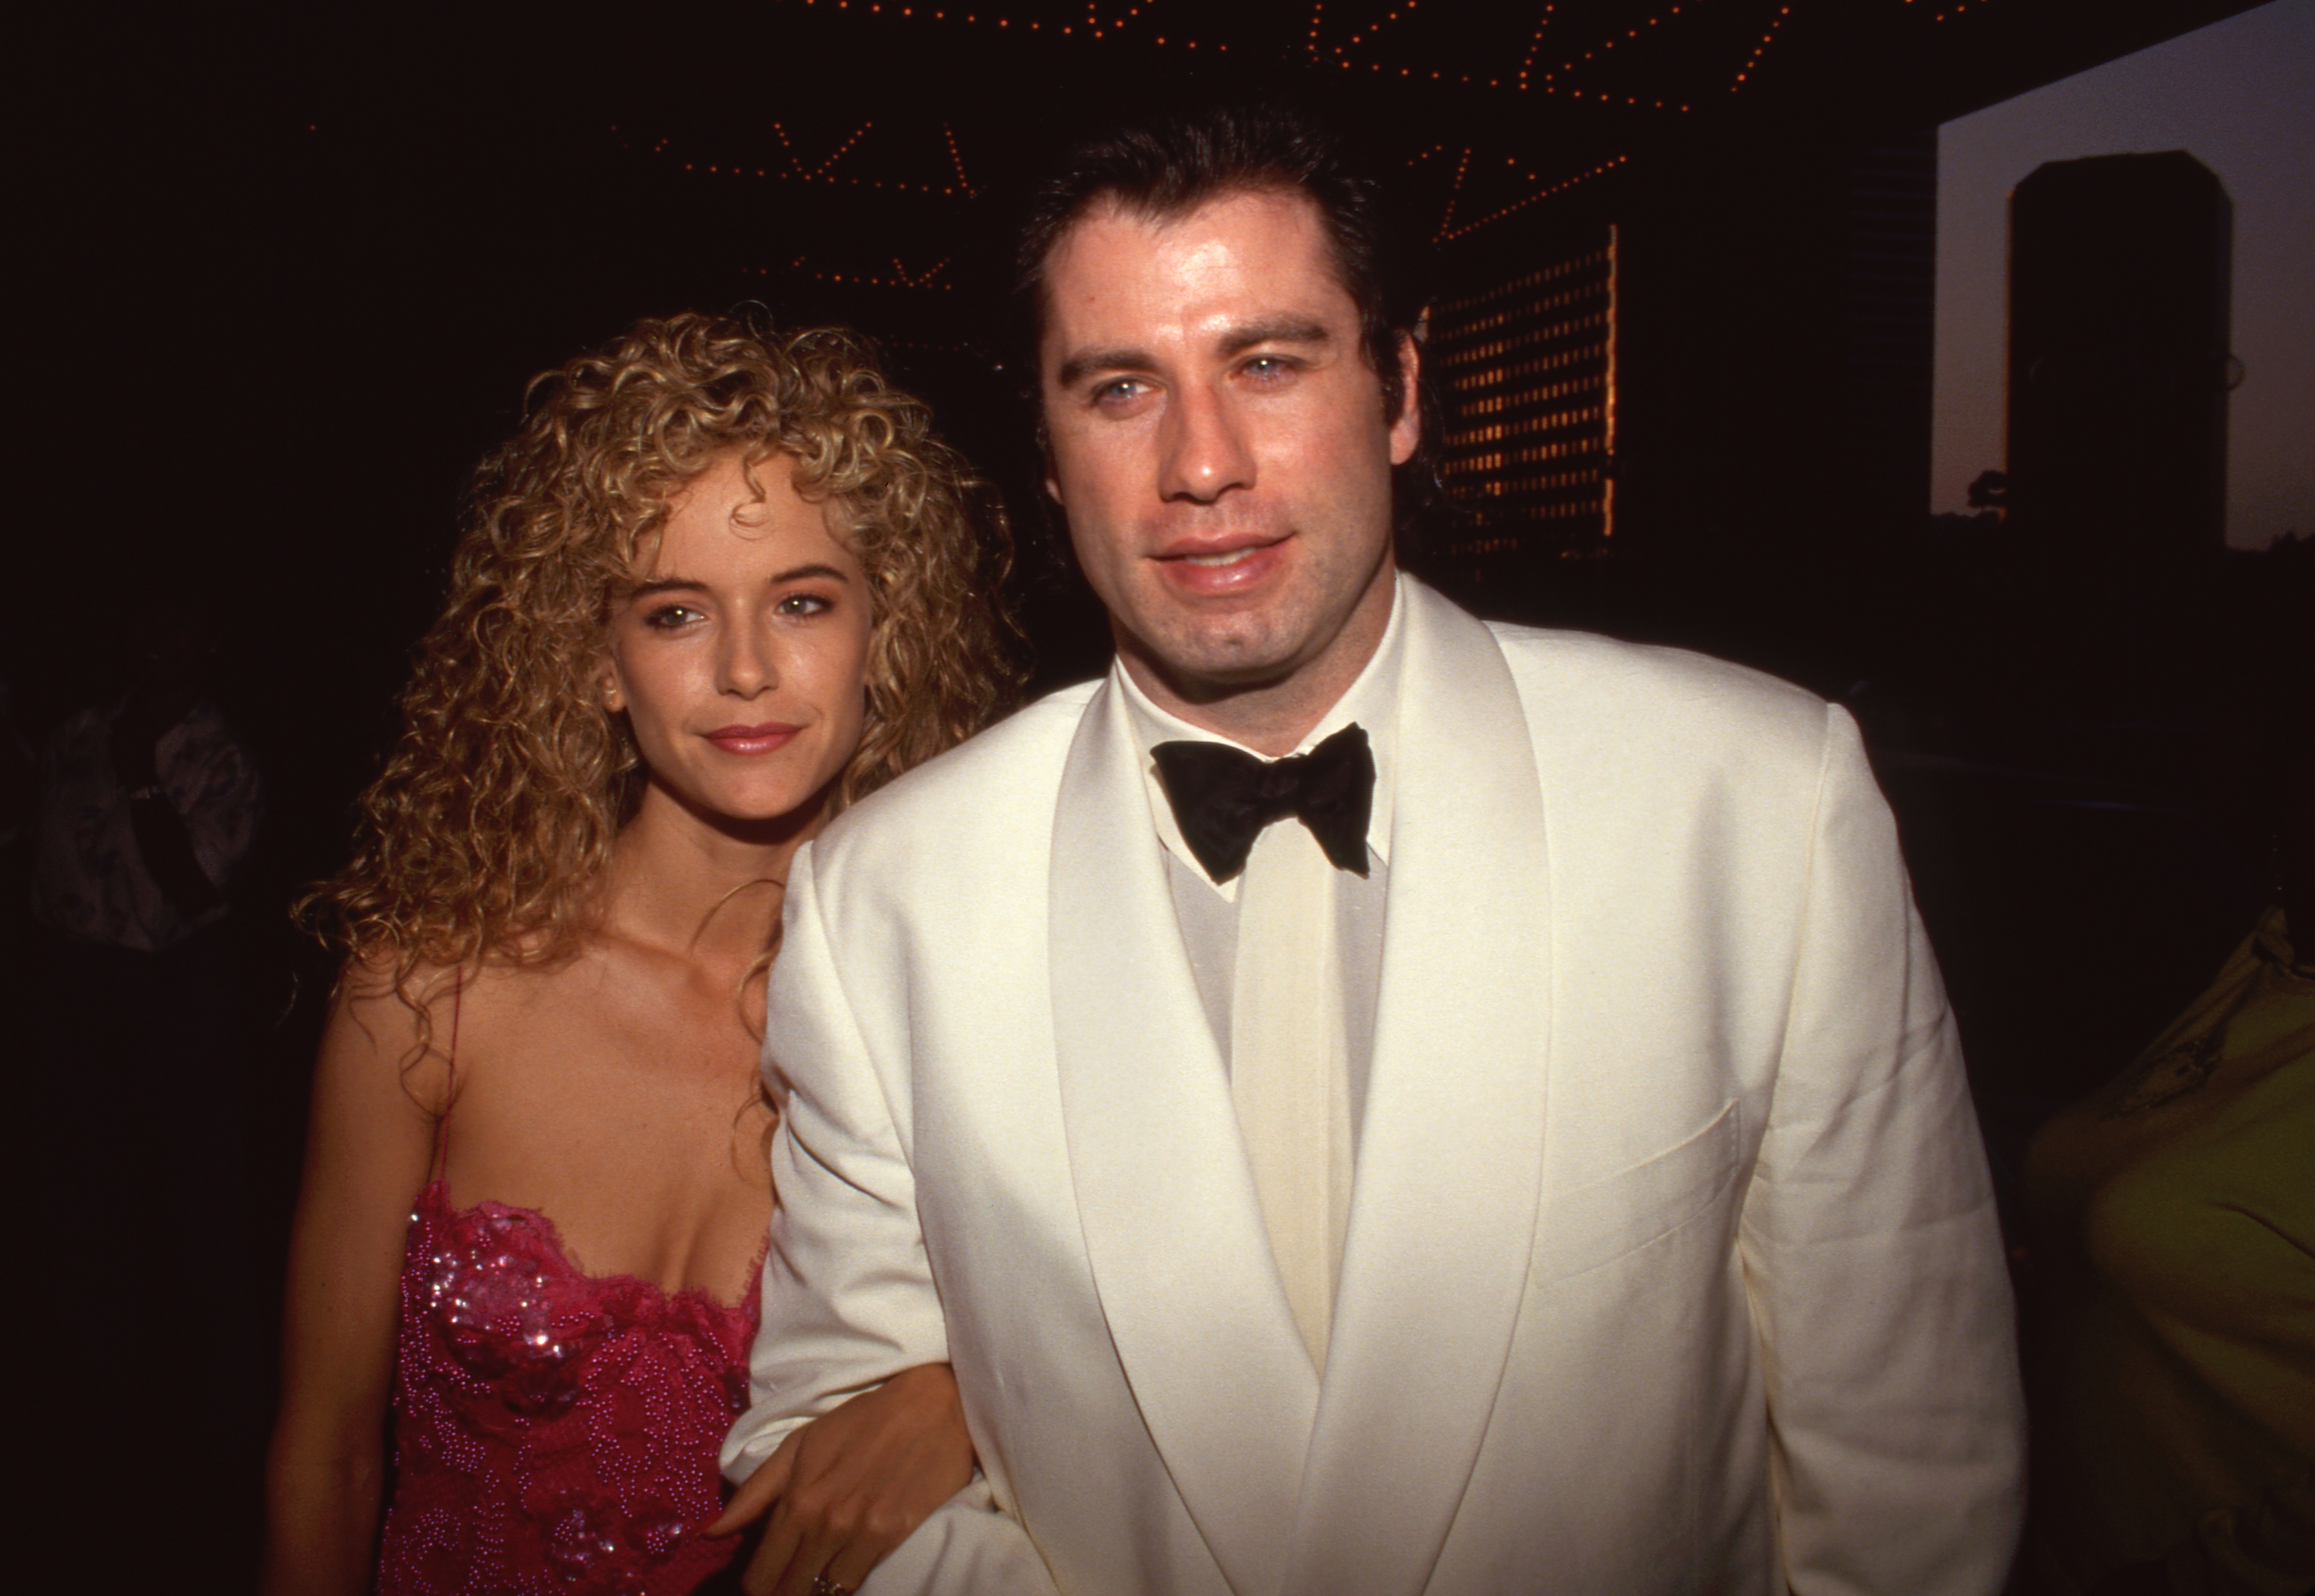 John Travolta and Kelly Preston at the NAACP Ninth Annual Roy Wilkins Award Salute to Eddie Murphy on July 19, 1991 in Los Angeles, California | Source: Getty Images